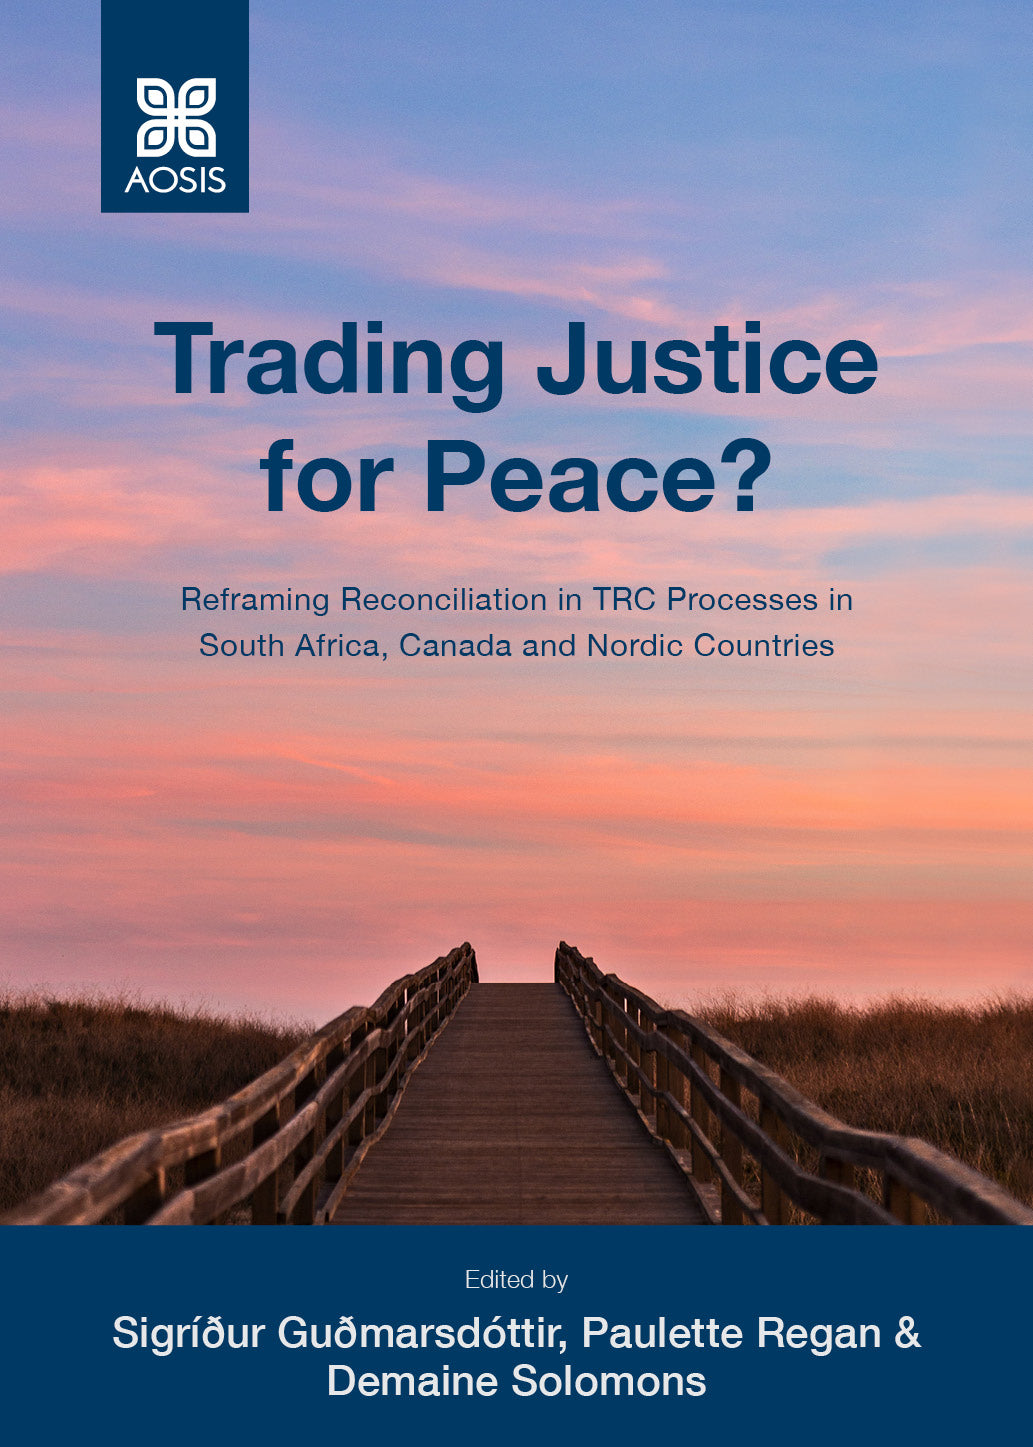 Trading Justice for Peace? Reframing Reconciliation in TRC Processes in South Africa, Canada and Nordic Countries (Print copy)